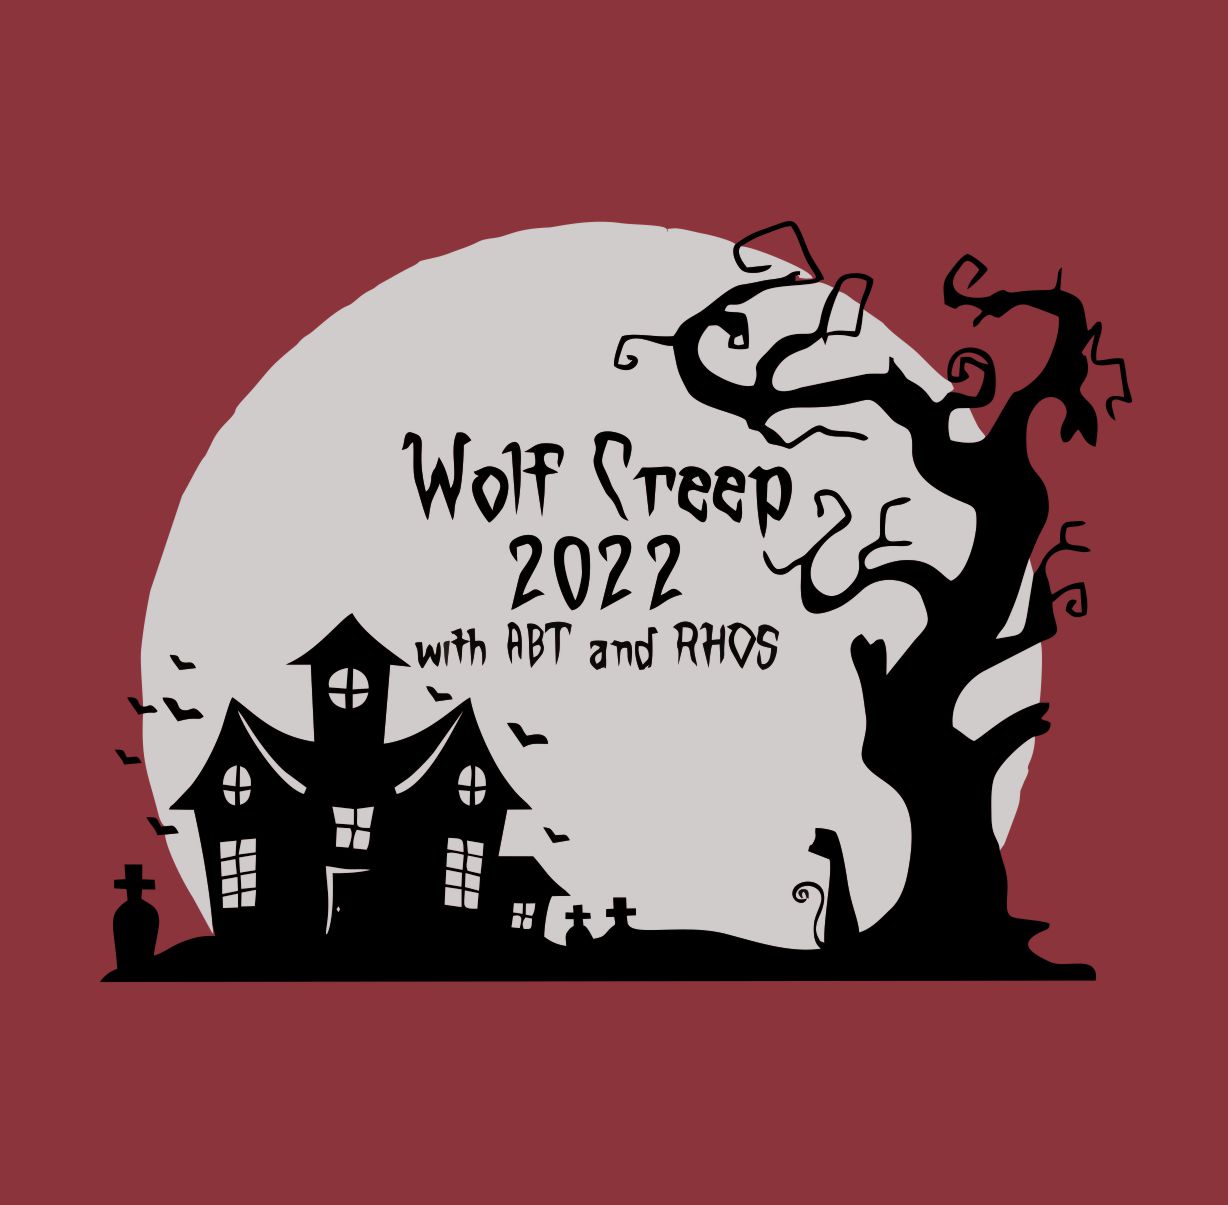 wolf creep 2 color screen print on a red t-shirt